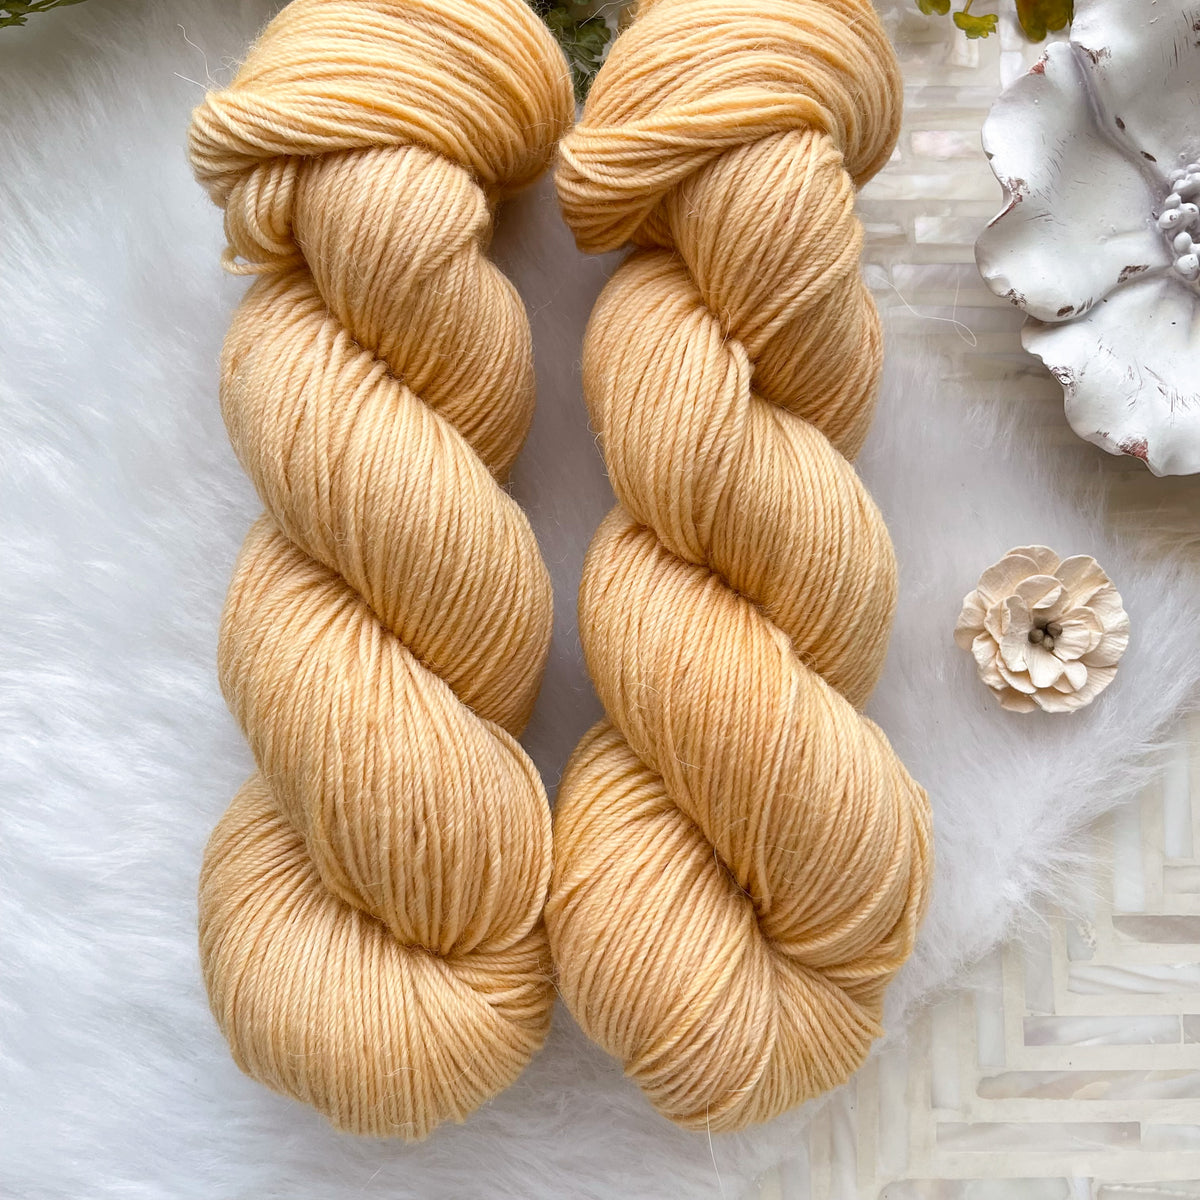 SUMMER WHEAT - Dyed to Order - Dreamy Base Handdyed Yarn